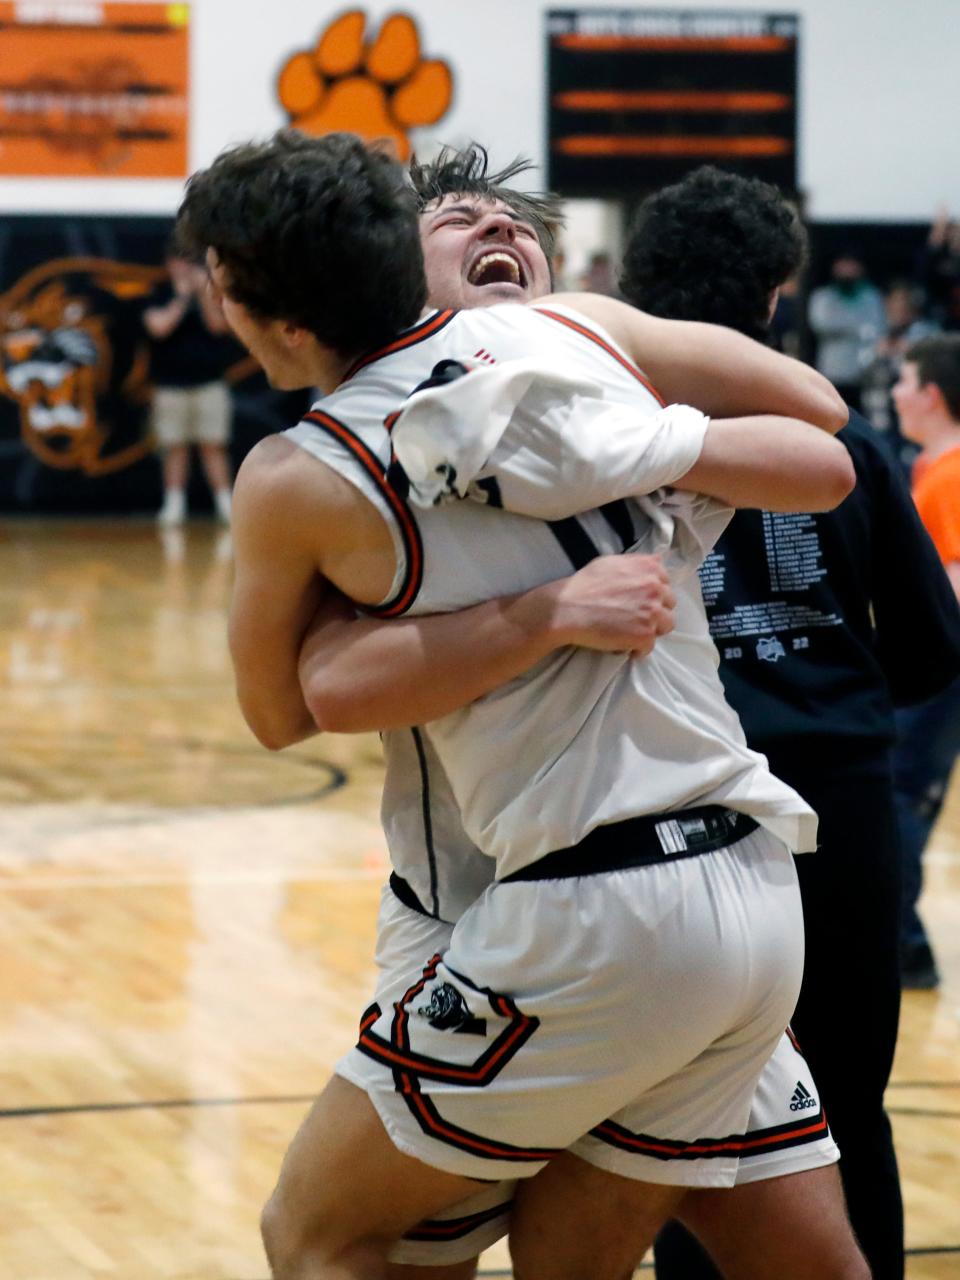 Seniors Lukas Ratliff, left, and Ryan Hobbs embrace in celebration folllowing New Lexington's 49-43 overtime win against visiting Ironton in a Division II sectional final on Saturday night in New Lexington. The Panthers overcame a 10-point fourth-quarter deficit to  claim their third sectional title in four years and second straight.